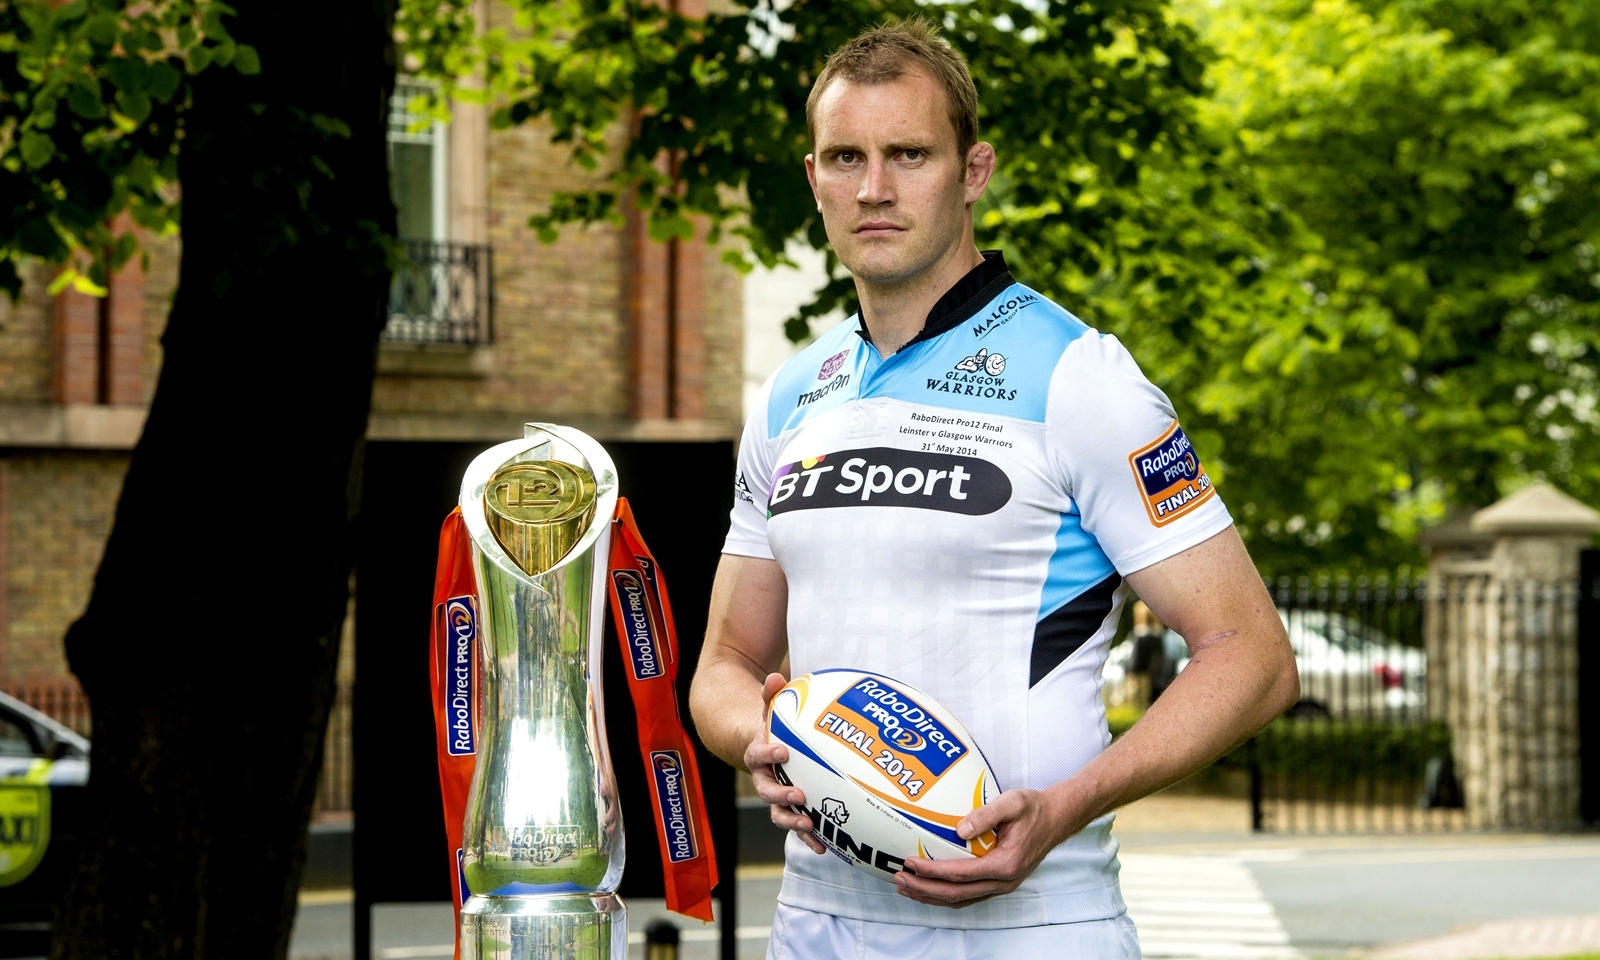 30/05/14
BEWLEY'S HOTEL - DUBLIN
Glasgow Warriors' Al Kellock is fully focused on his side's clash with Leinster in the RaboDirect PRO12 Final.